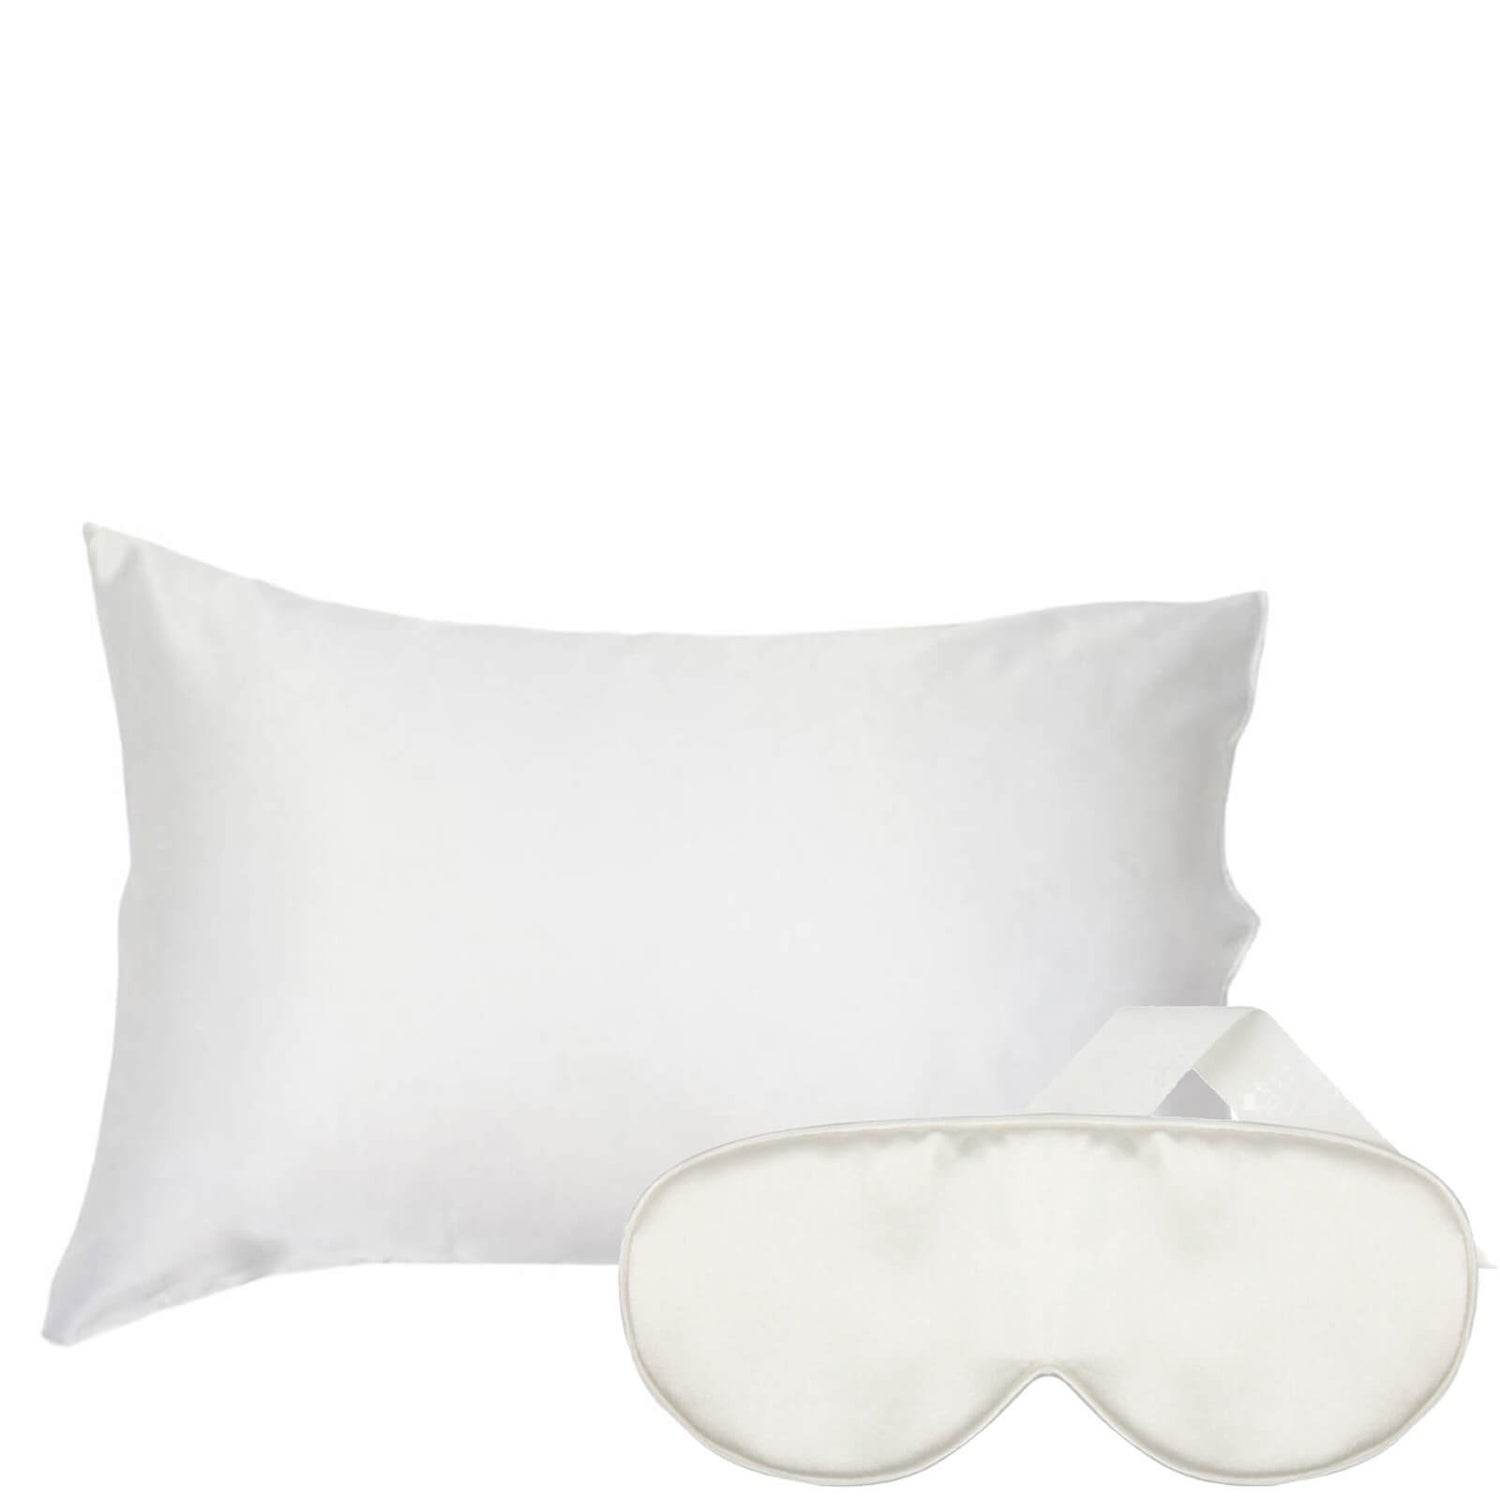 The Goodnight Co. Silk Sleep Mask and Queen Size Pillowcase - White (Worth $140.00)